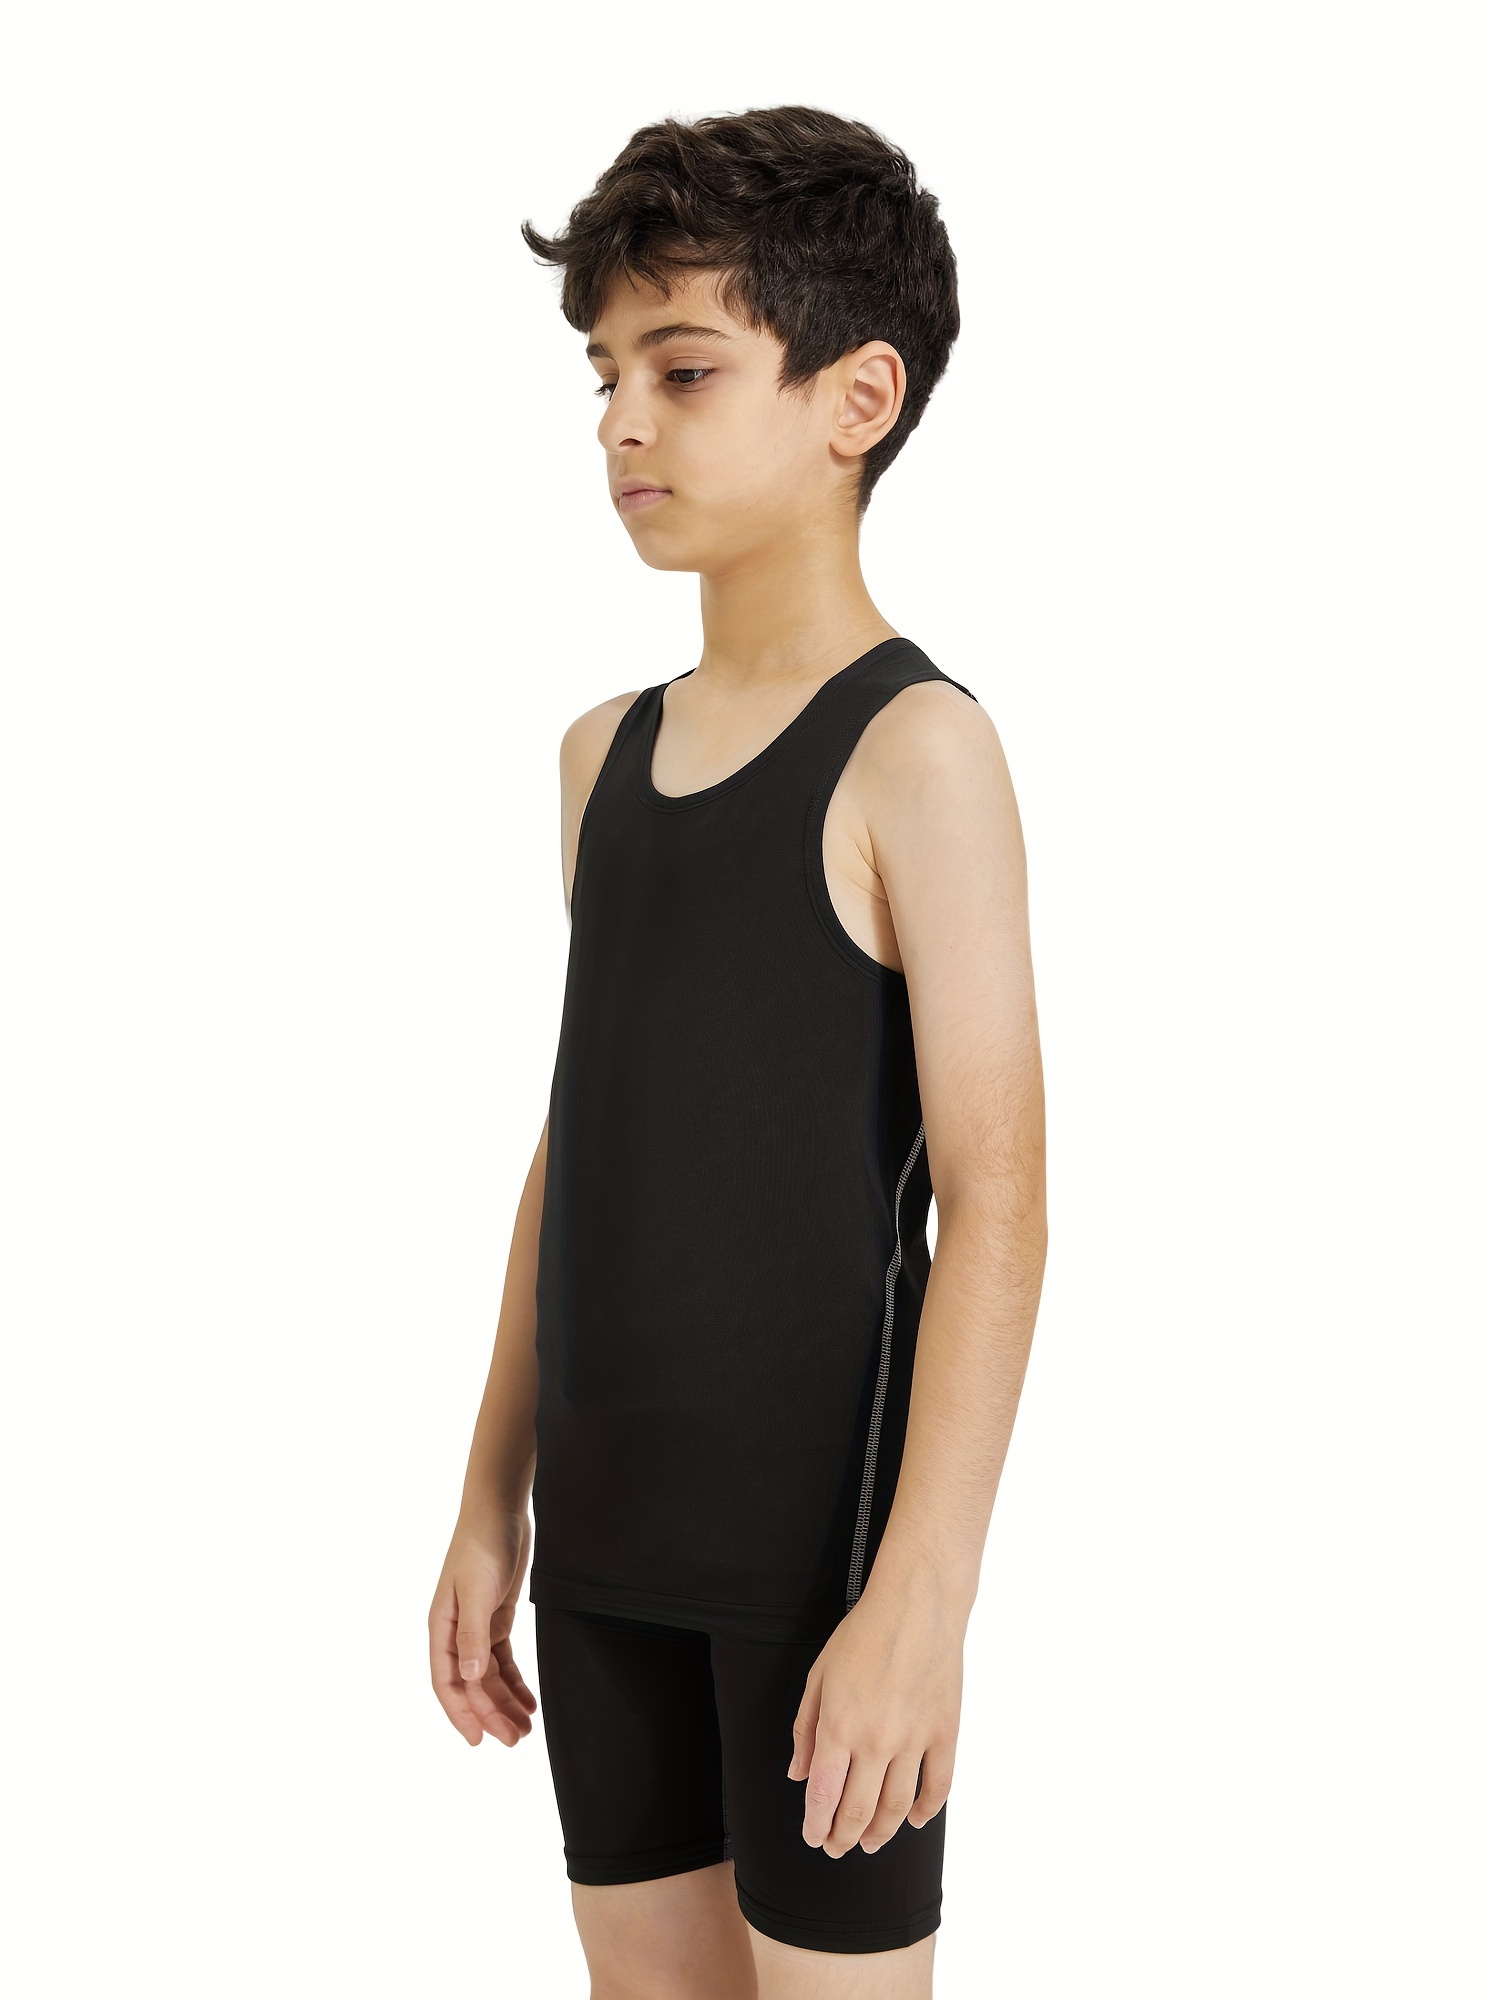 2pcs Compression Tank Top For Kids, Athletic Sleeveless Undershirts,  Workout Base Layer Vest For Boys & Girls